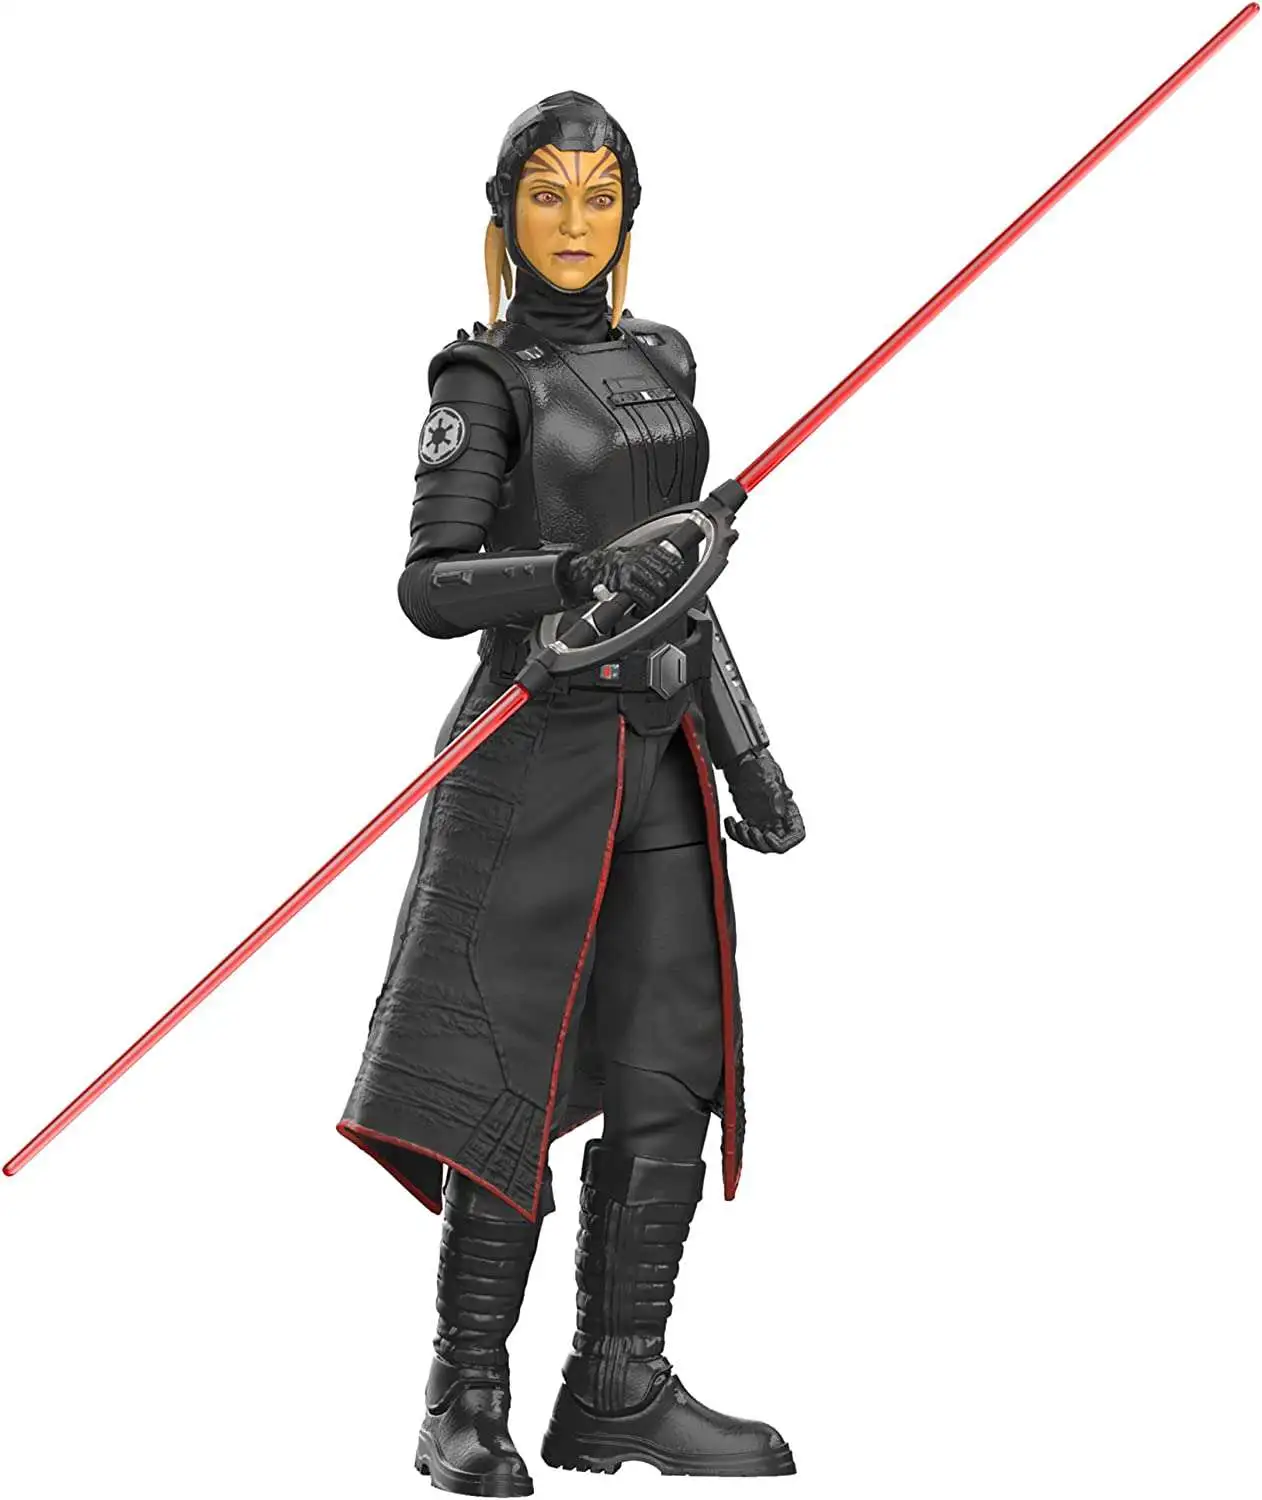 Star Wars Revenge of the Sith Black Series Fourth Sister Inquisitor Action Figure (Pre-Order ships March)